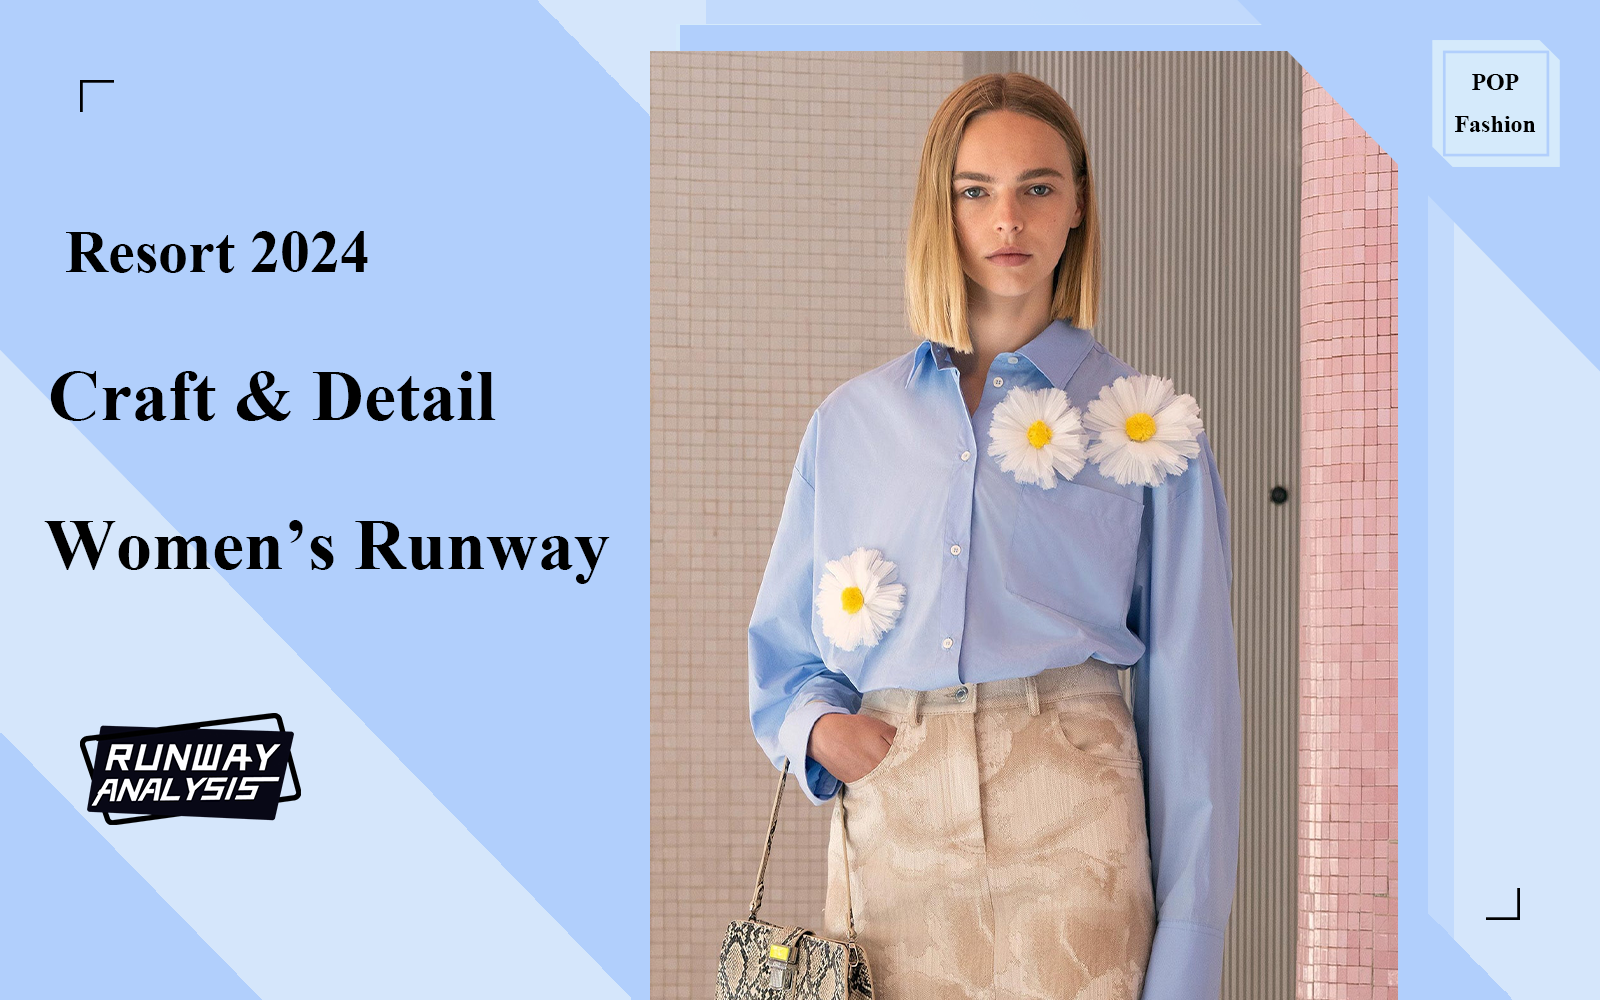 Craft & Detail -- The Comprehensive Analysis of Resort 2024 Women's Ready-to-Wear Runway